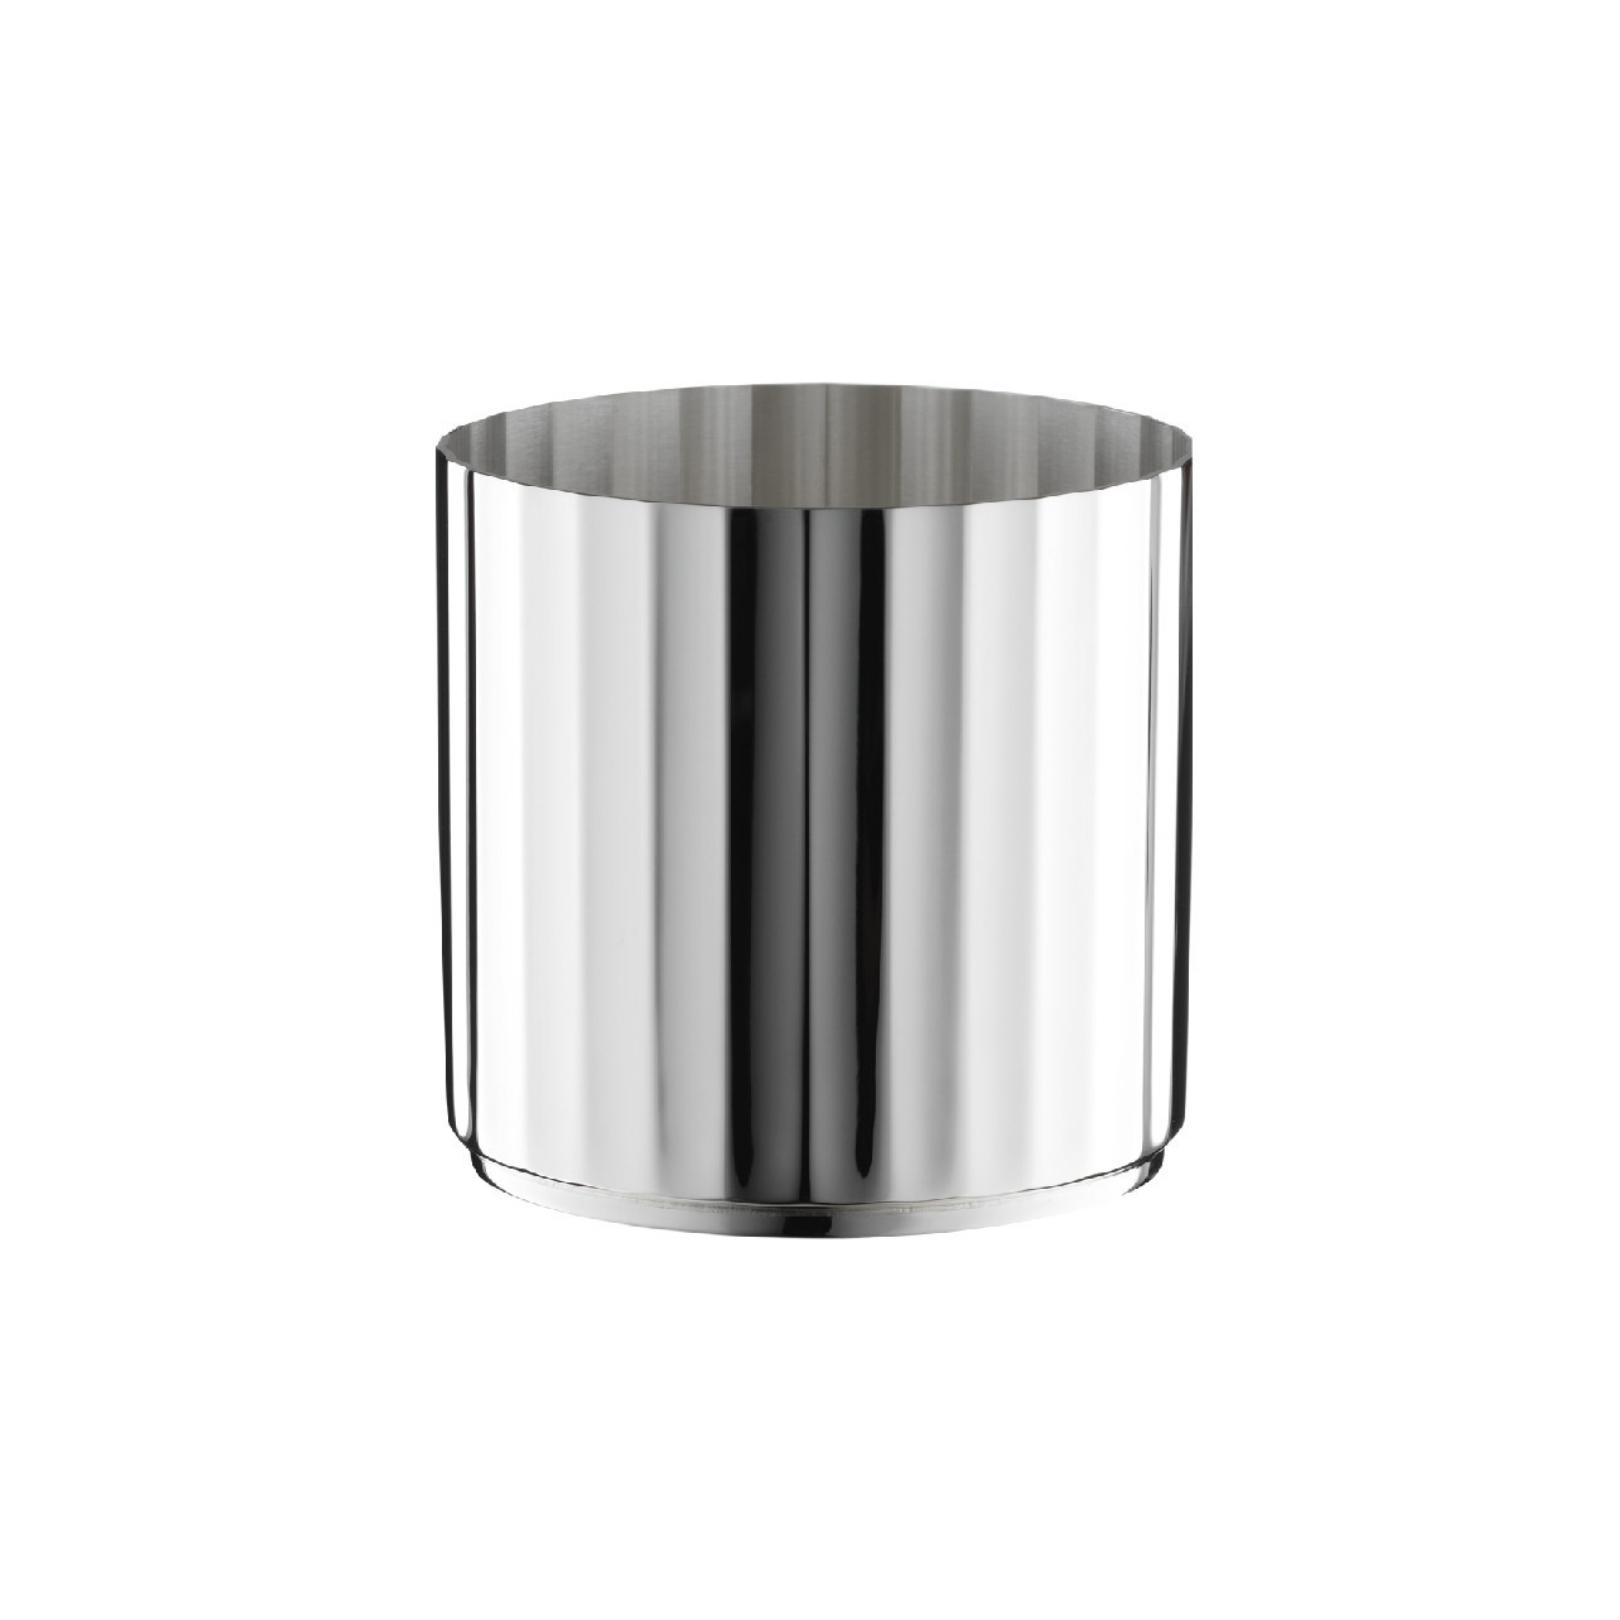 Whiskey tumbler Belvedere Silver-plated 90 Robbe  Berking